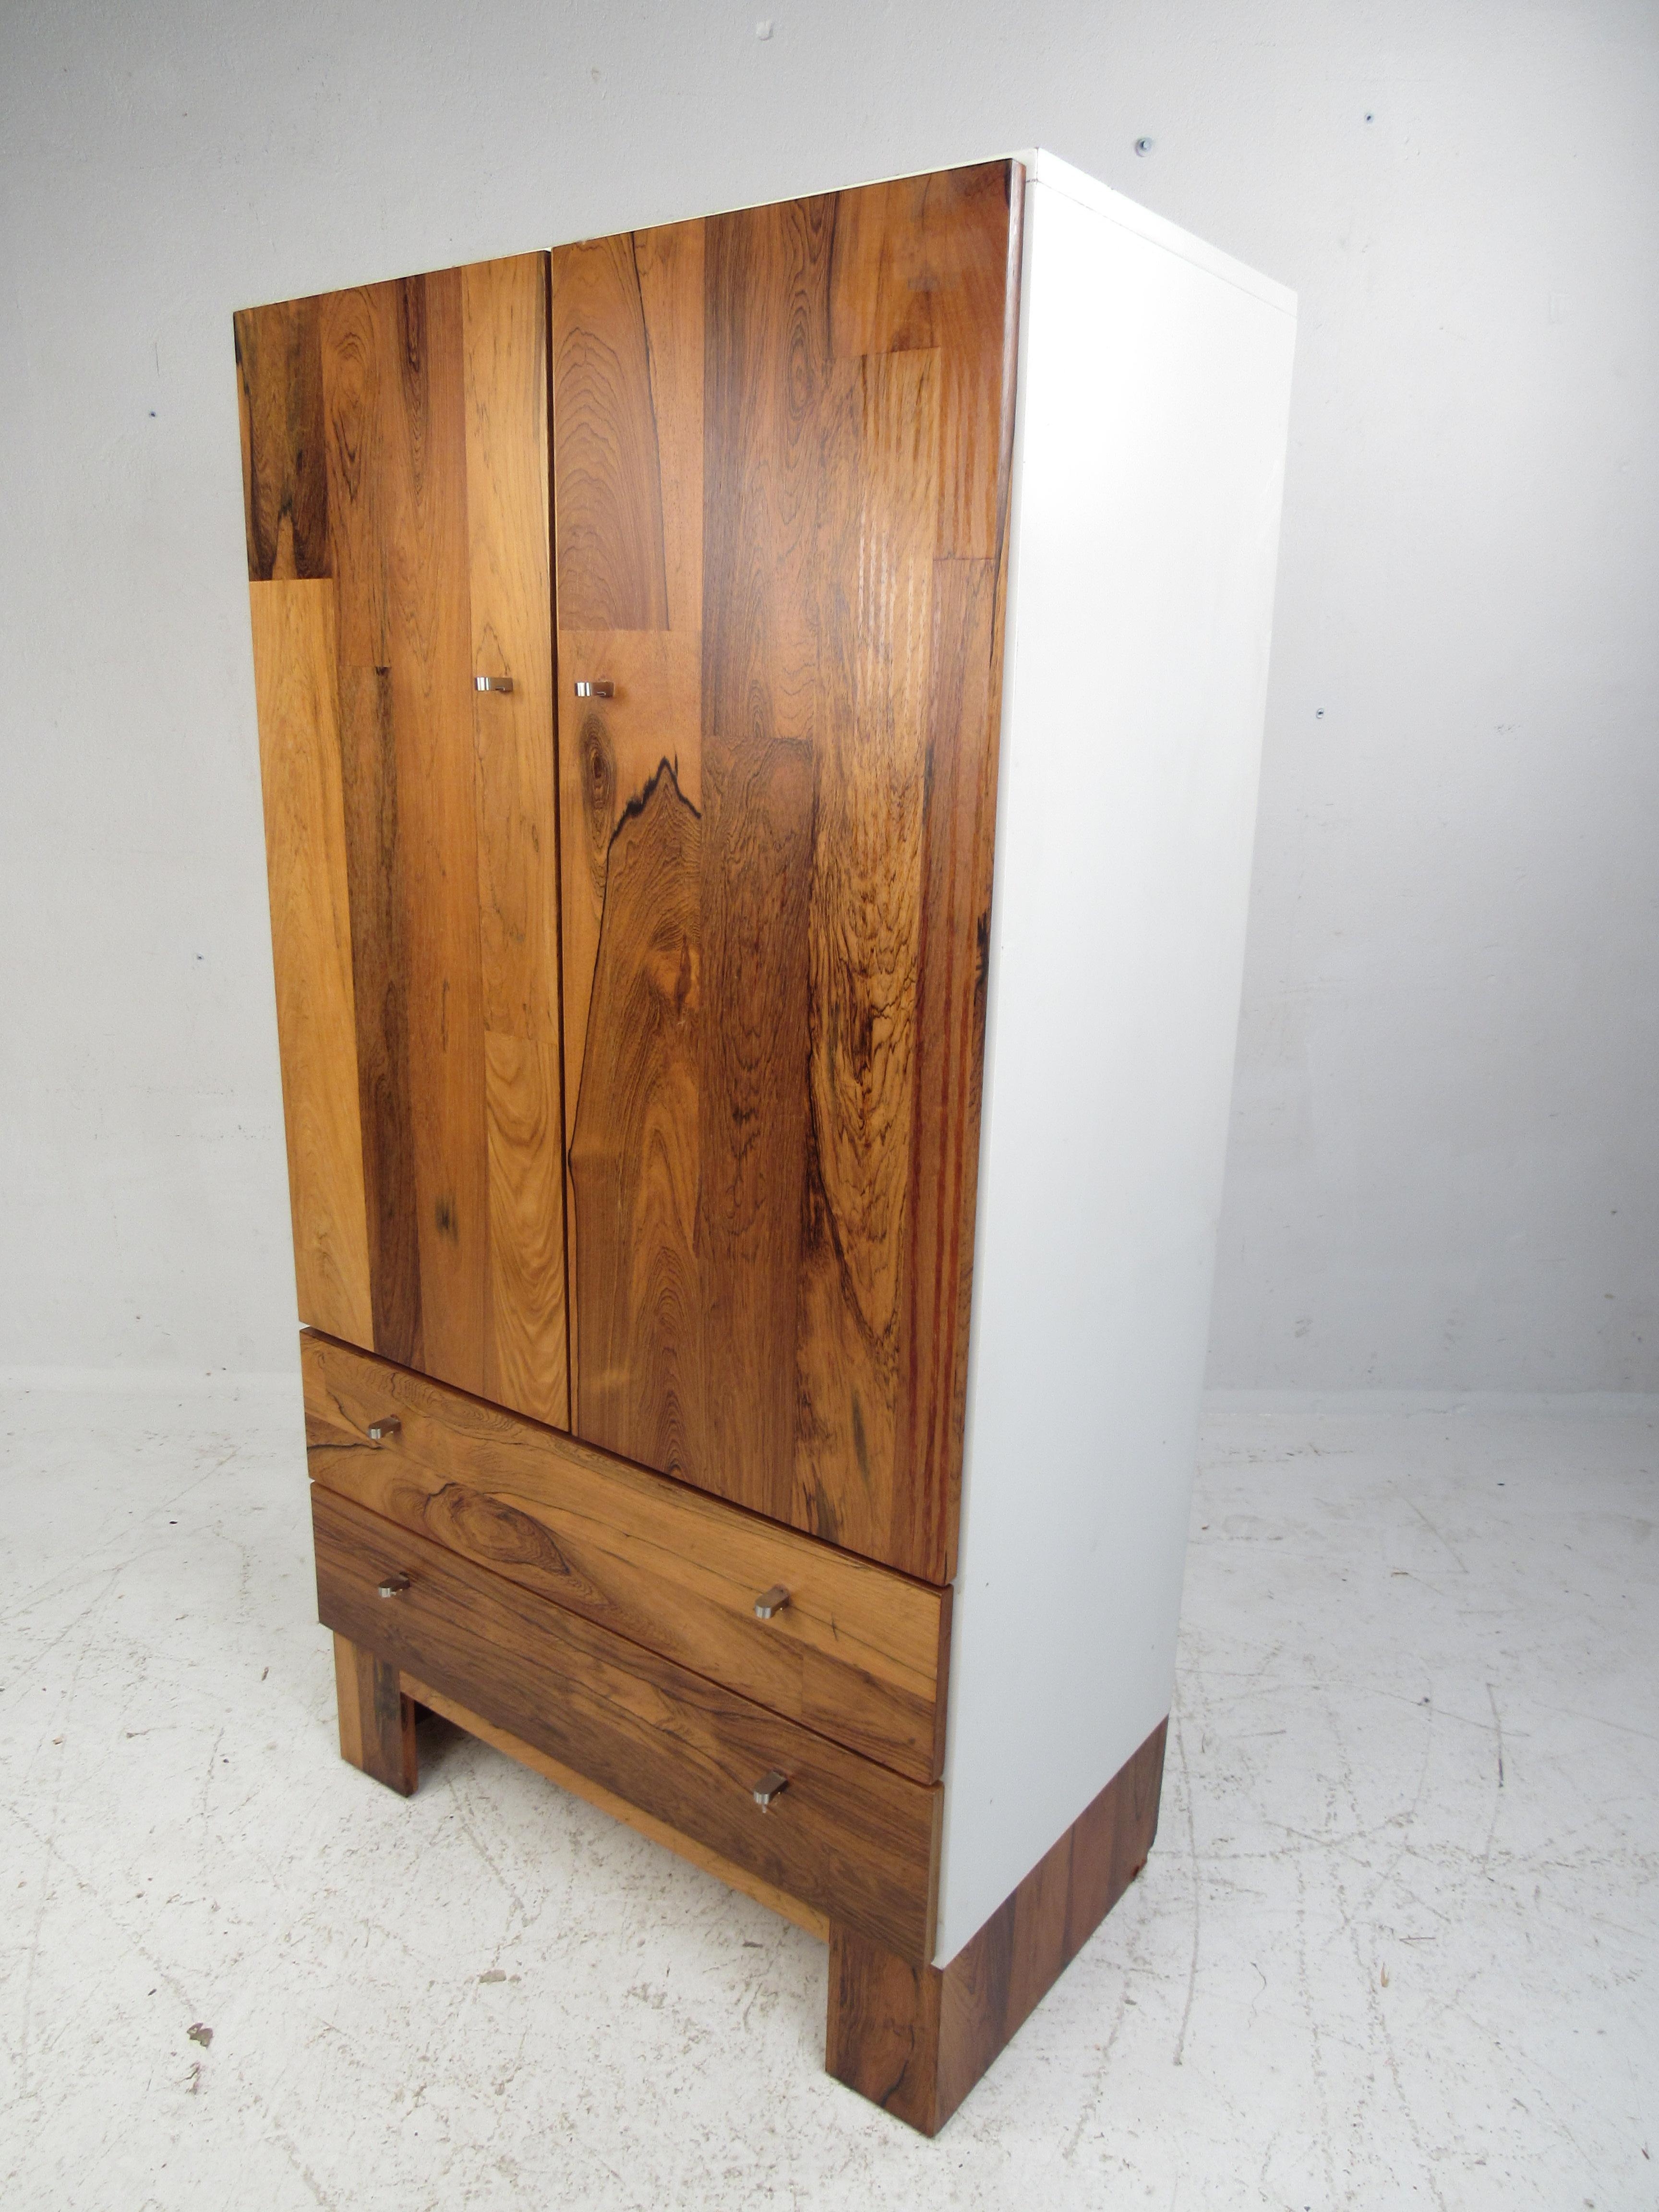 This beautiful Mid-Century Modern armoire boasts a rich rosewood front and a white casing. The lovely two-tone design with uniquely shaped chrome pulls and a white interior easily complements any bedroom. A stylish case piece with plenty of room for